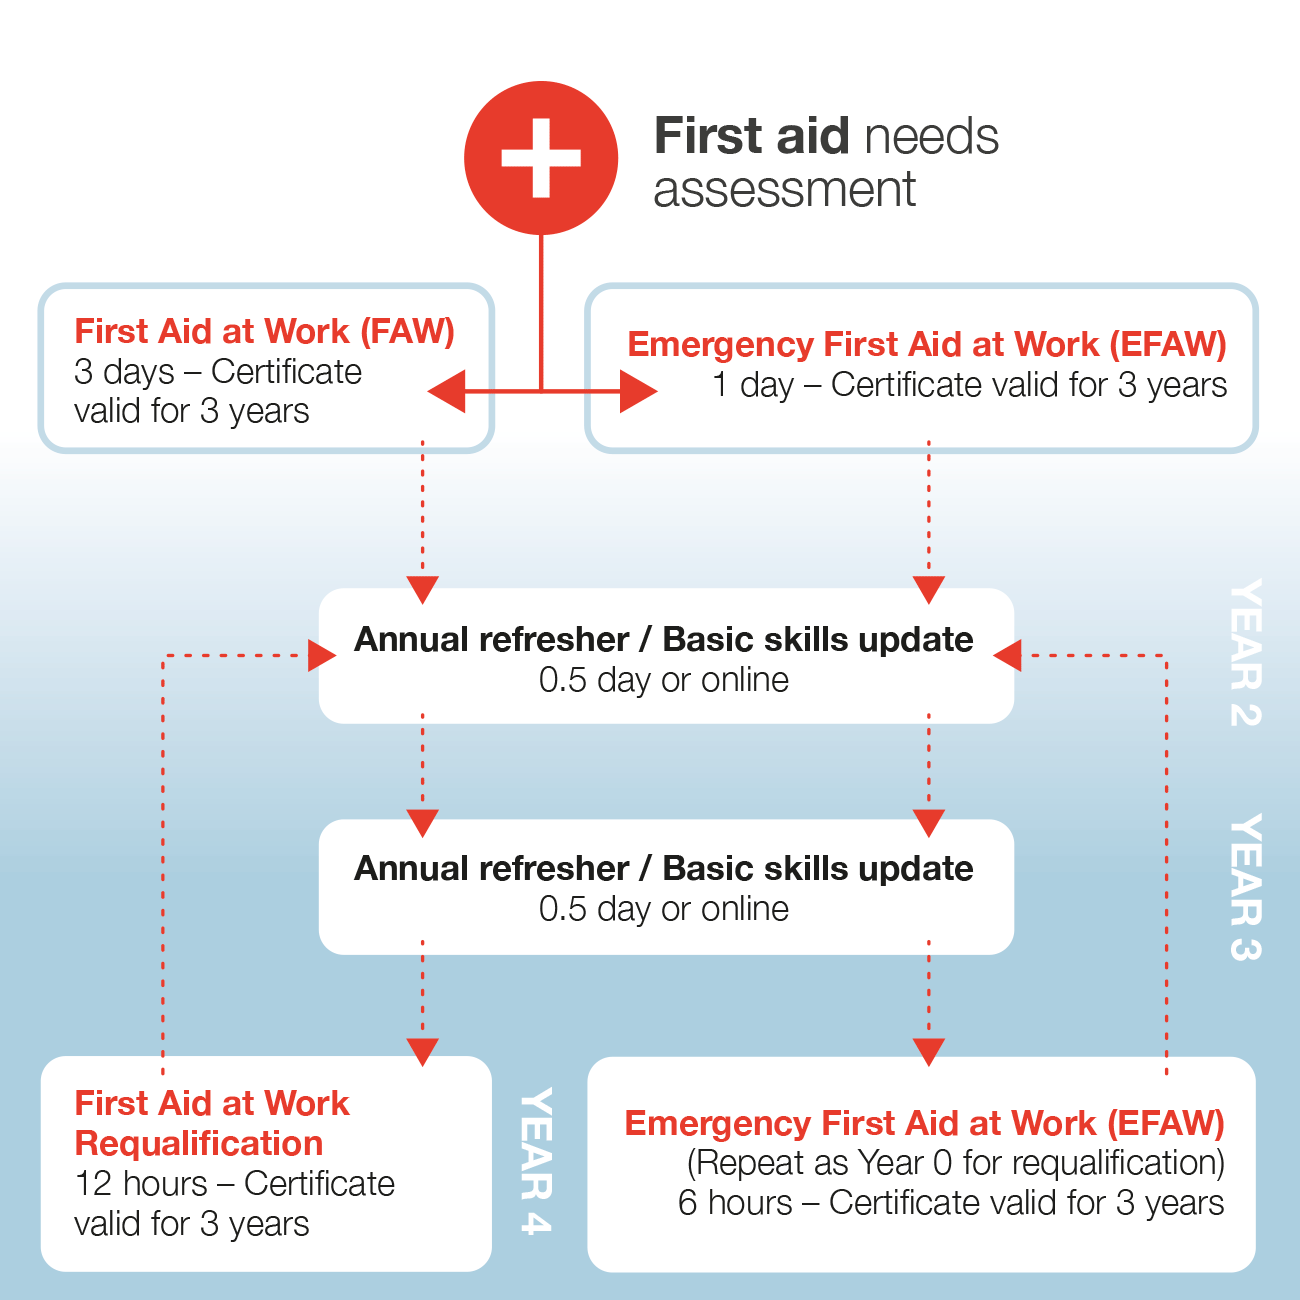 First aid training frequency